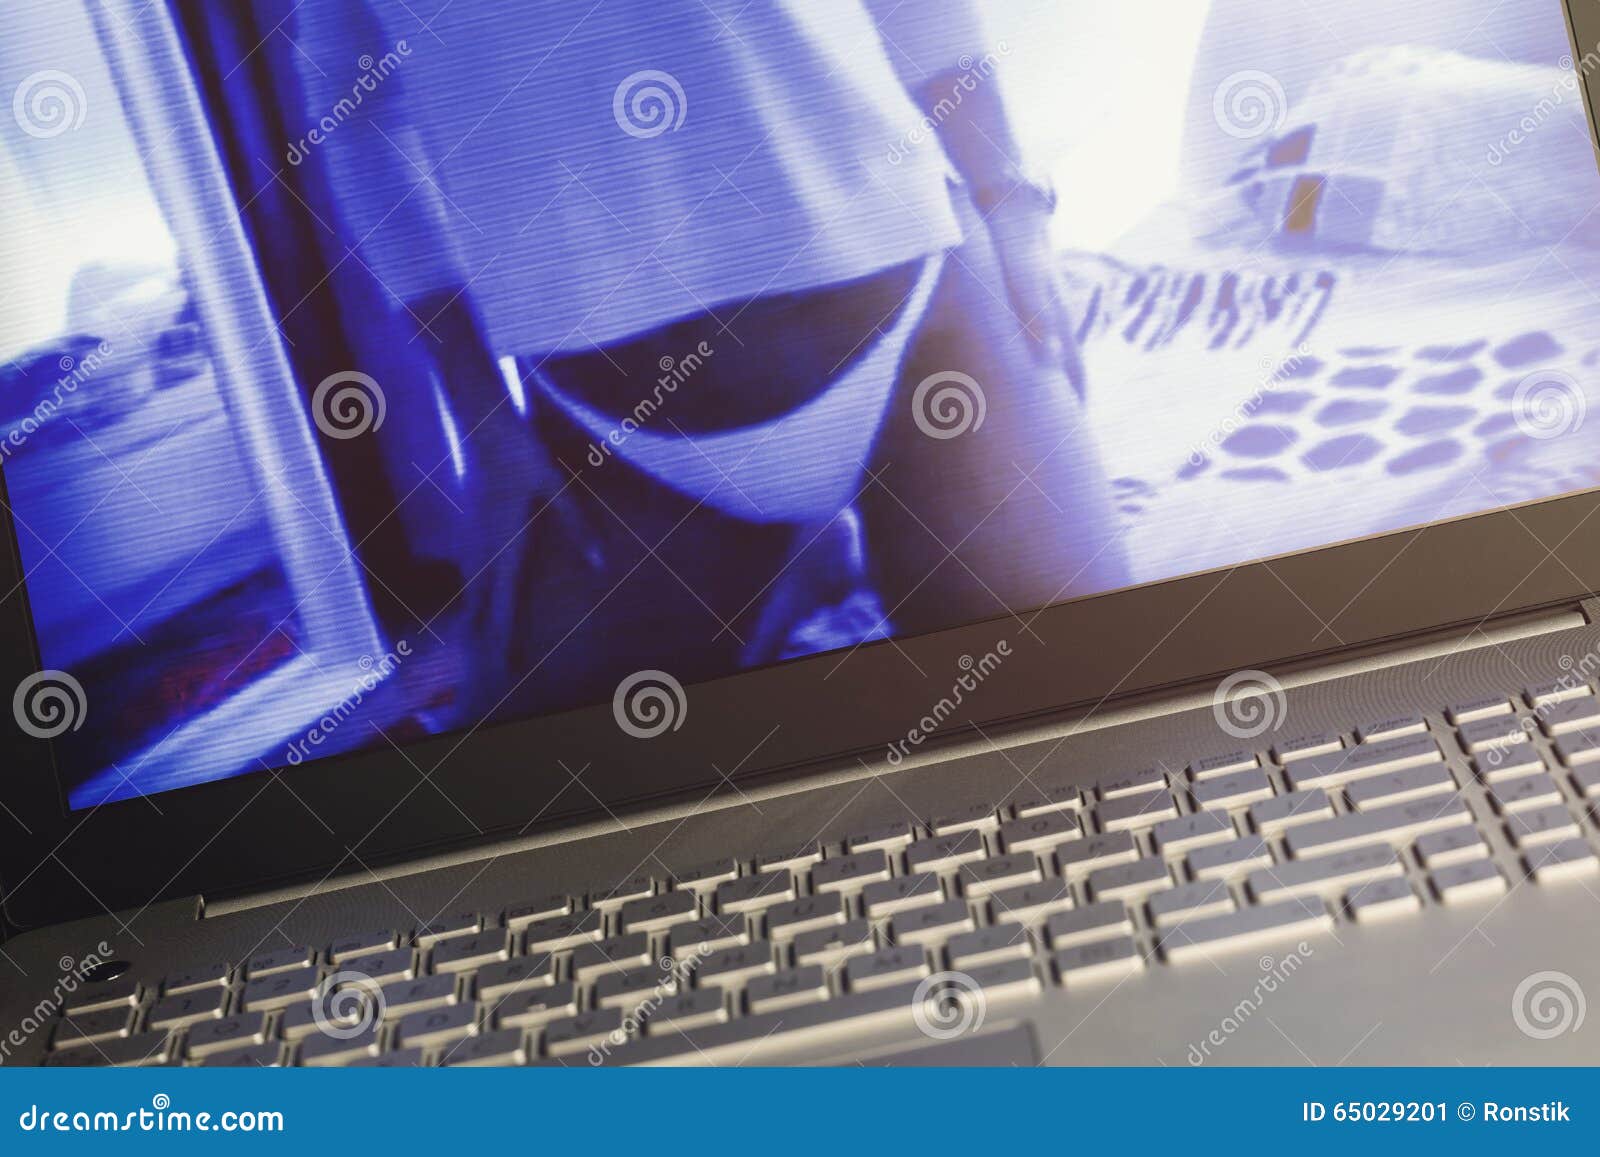 Online Sex Video Chat on Laptop Stock Image - Image of flirt, concept: 65029201